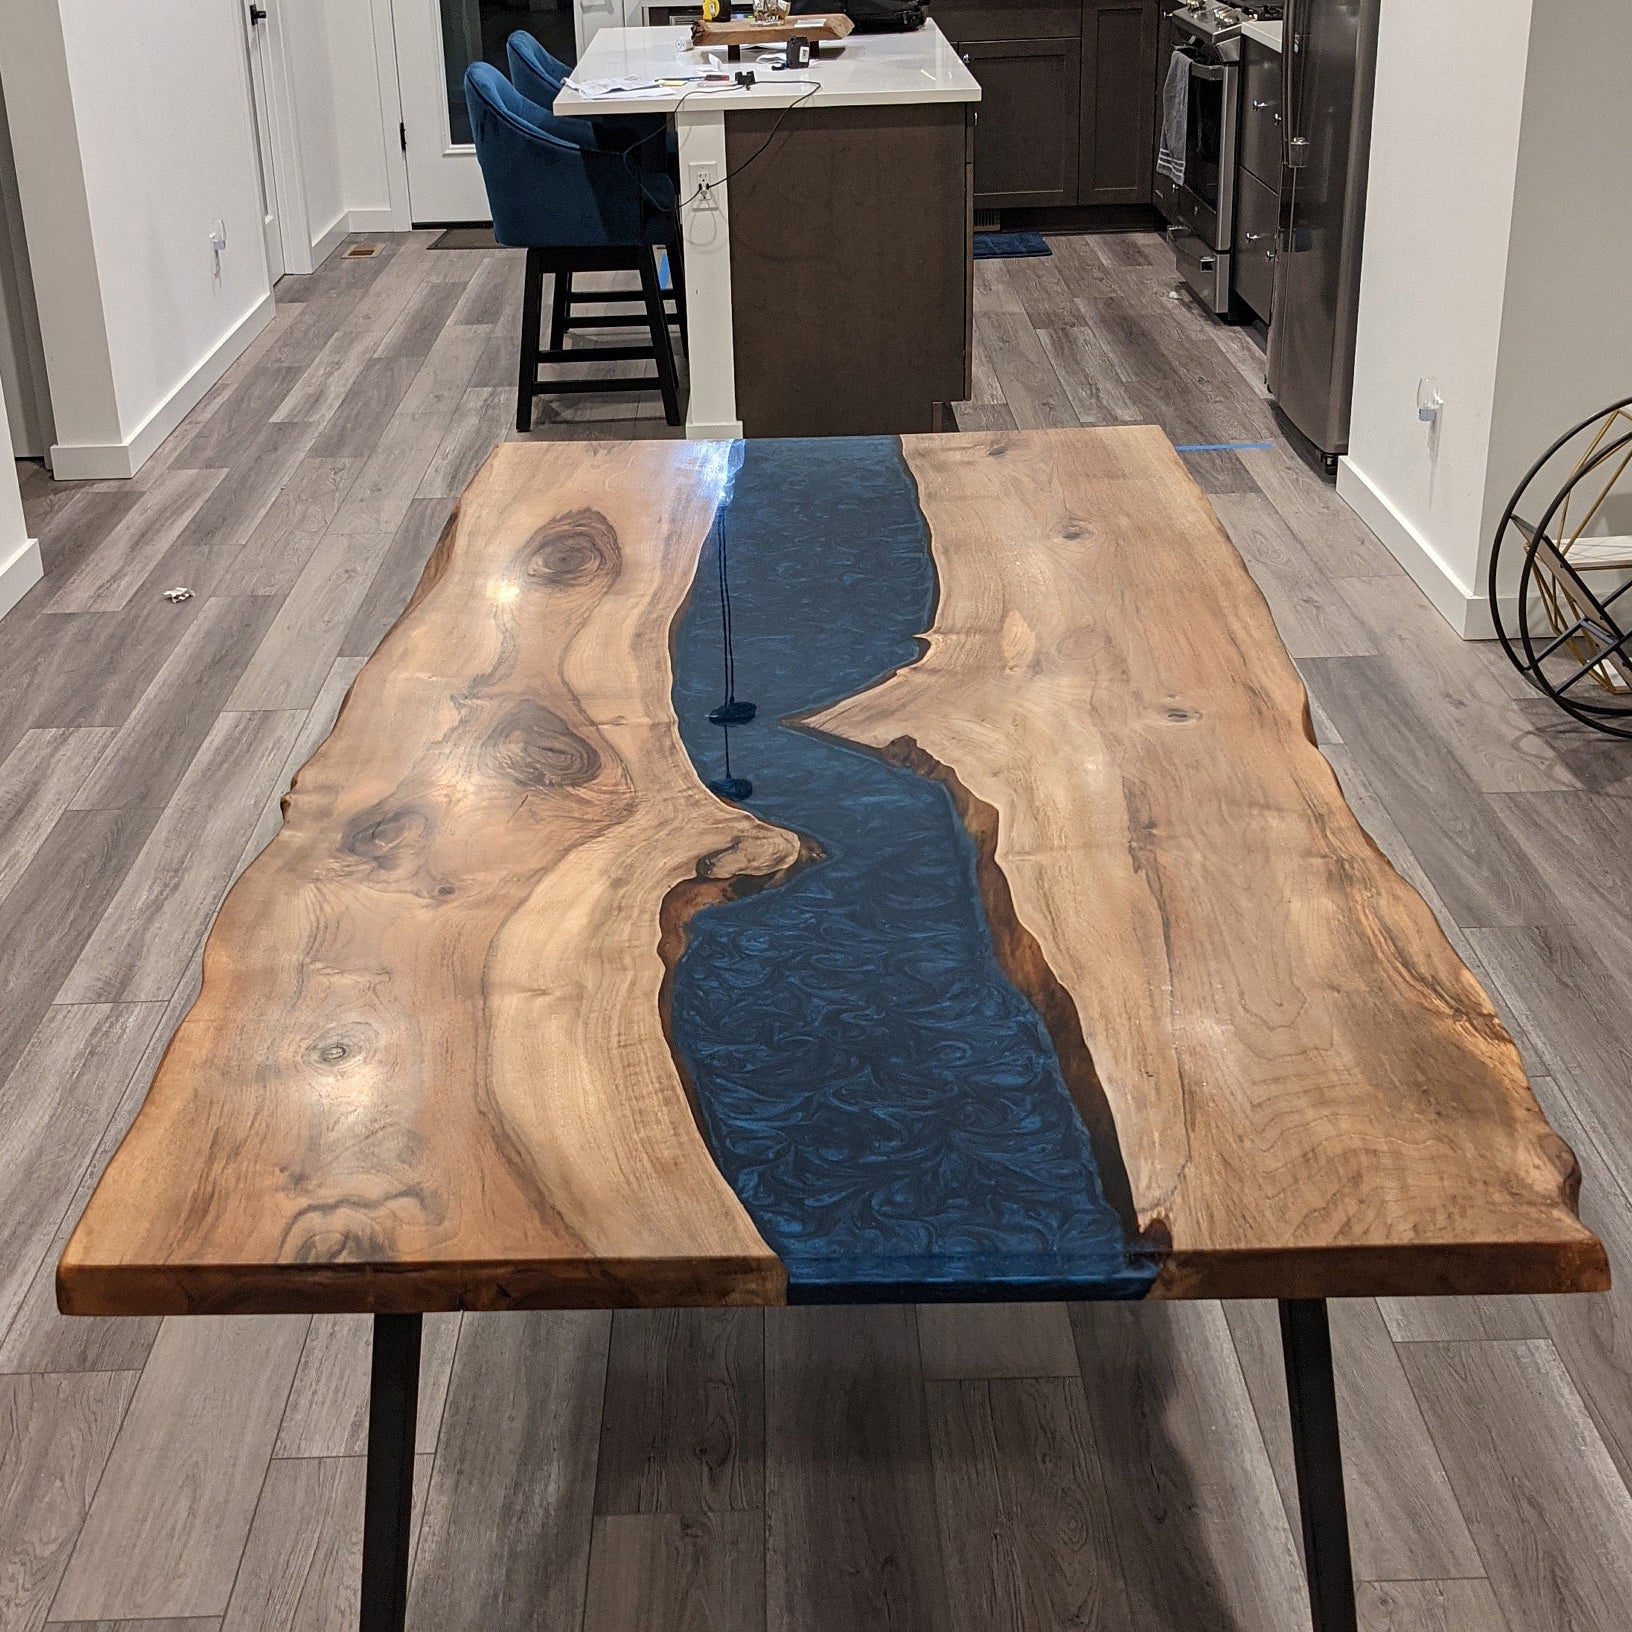 Building an epoxy resin table—perfect craftsmanship from design to production